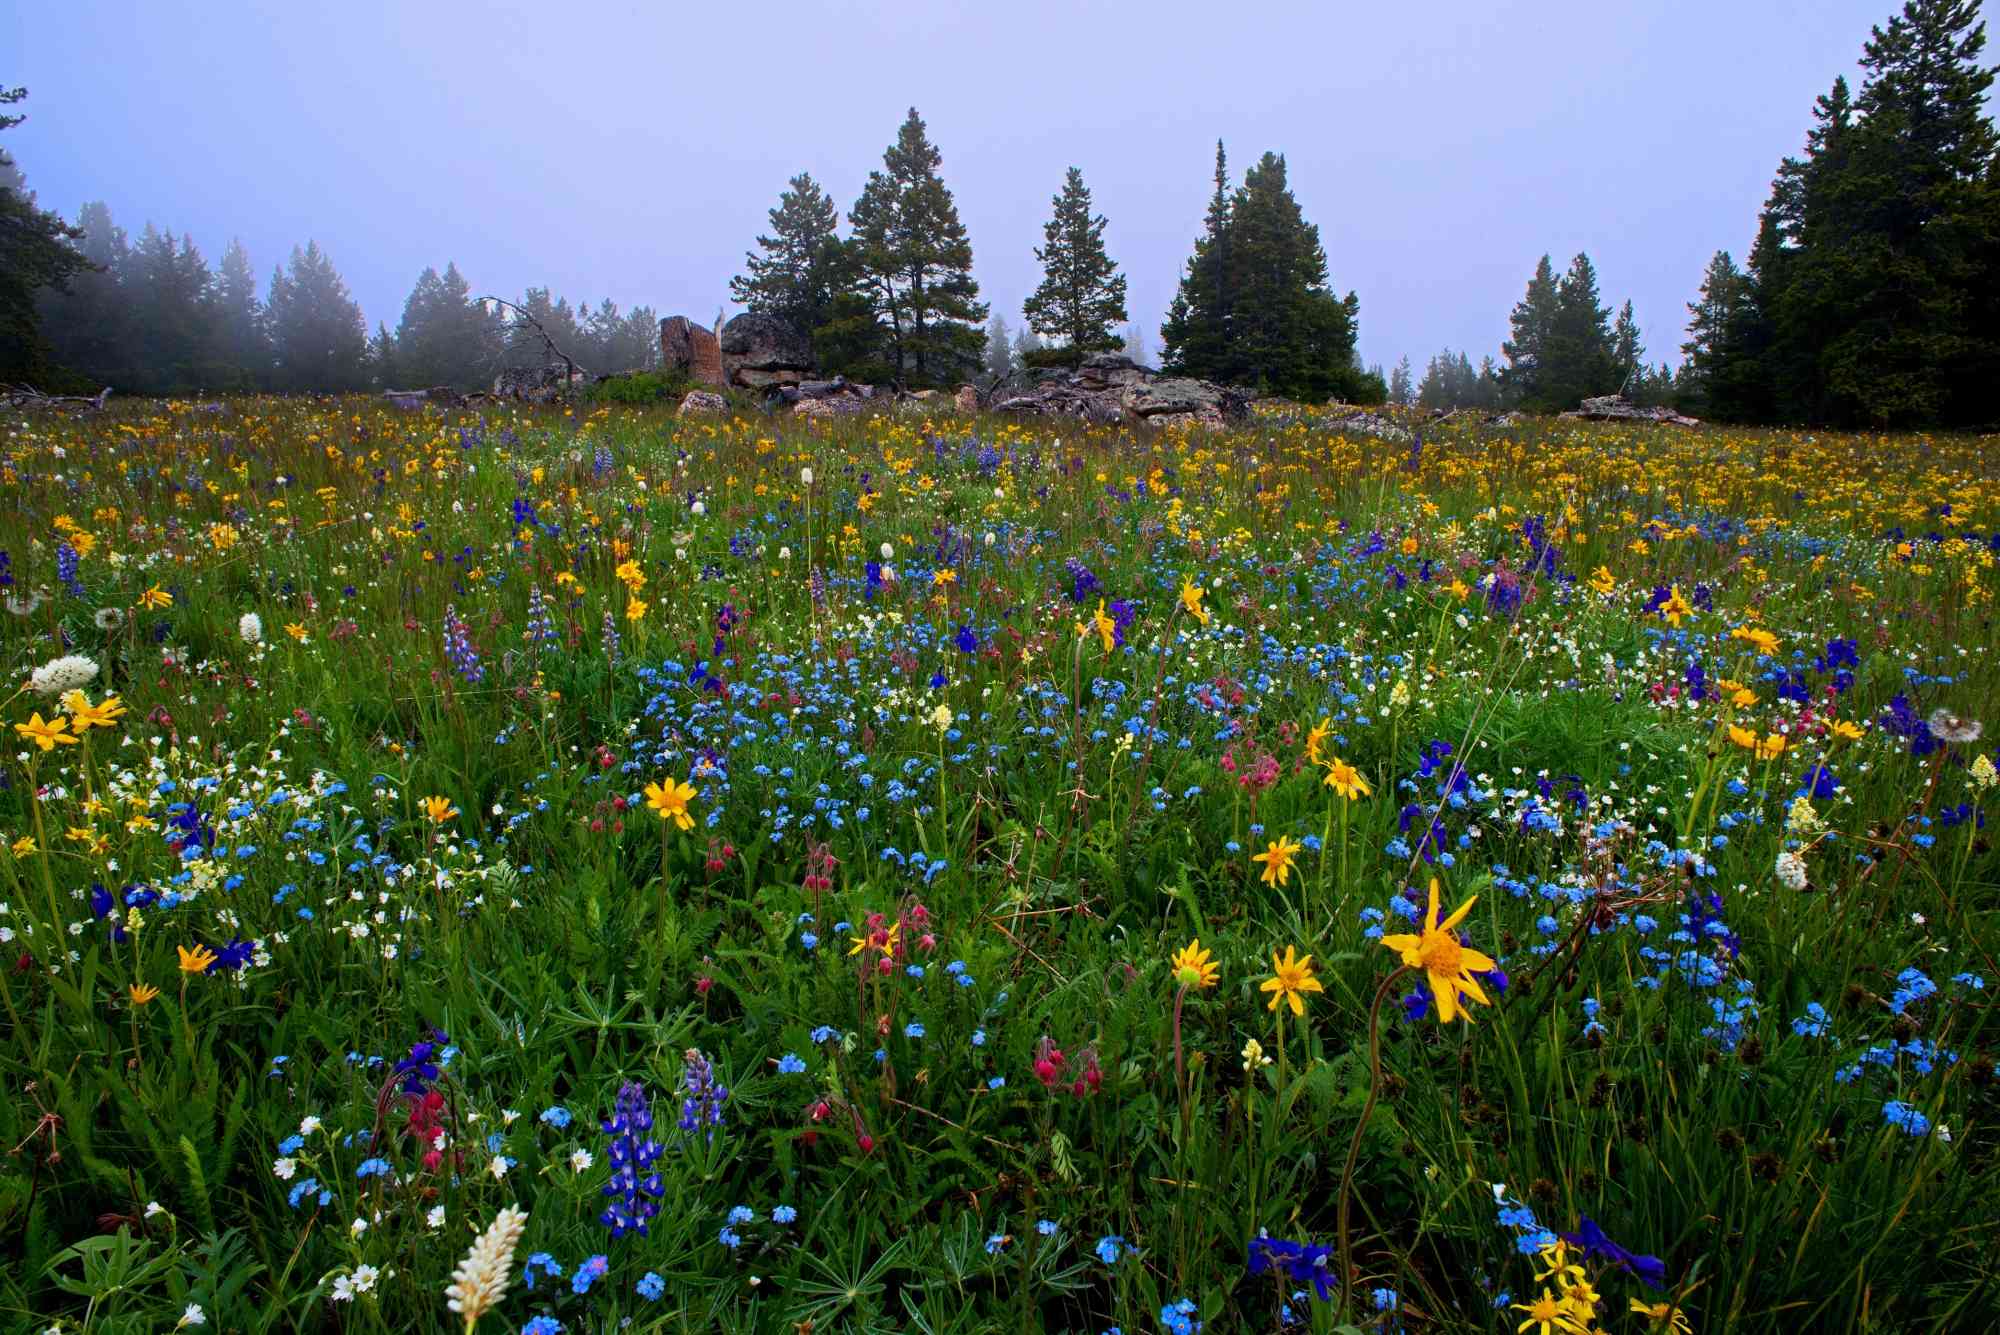 2015.06.16 - Spring Wildflowers - Bighorn National Forest - Wyoming - Jeff Beaupre